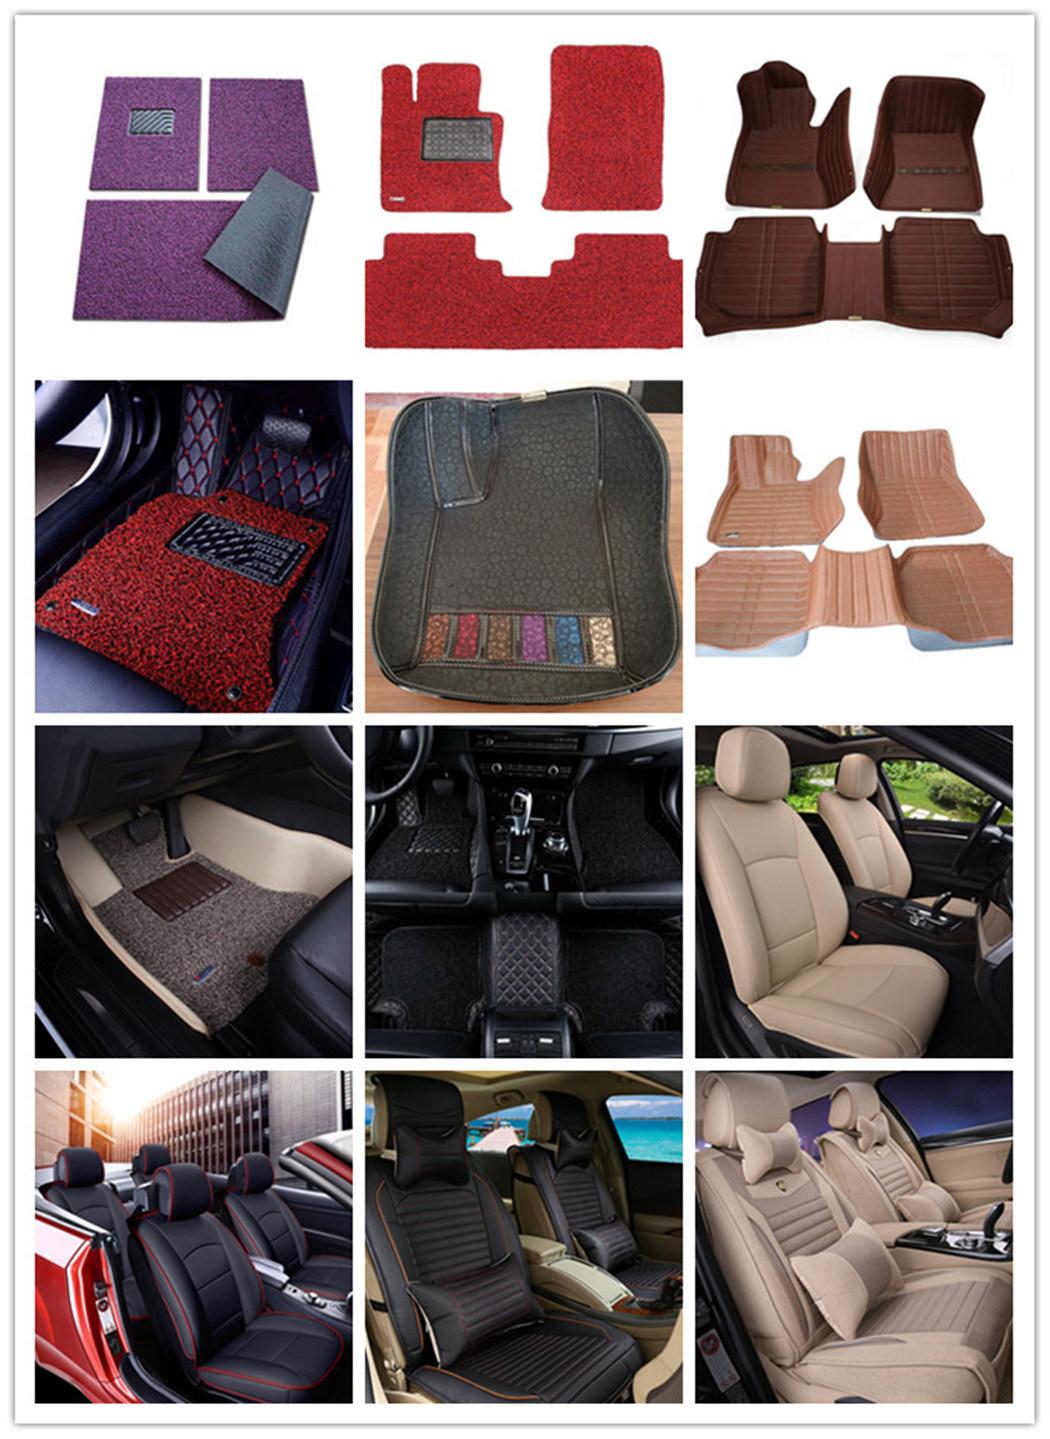 Automatic CNC Foam Composites Material Seat Cover Cutting Machine with No Laser Cutter